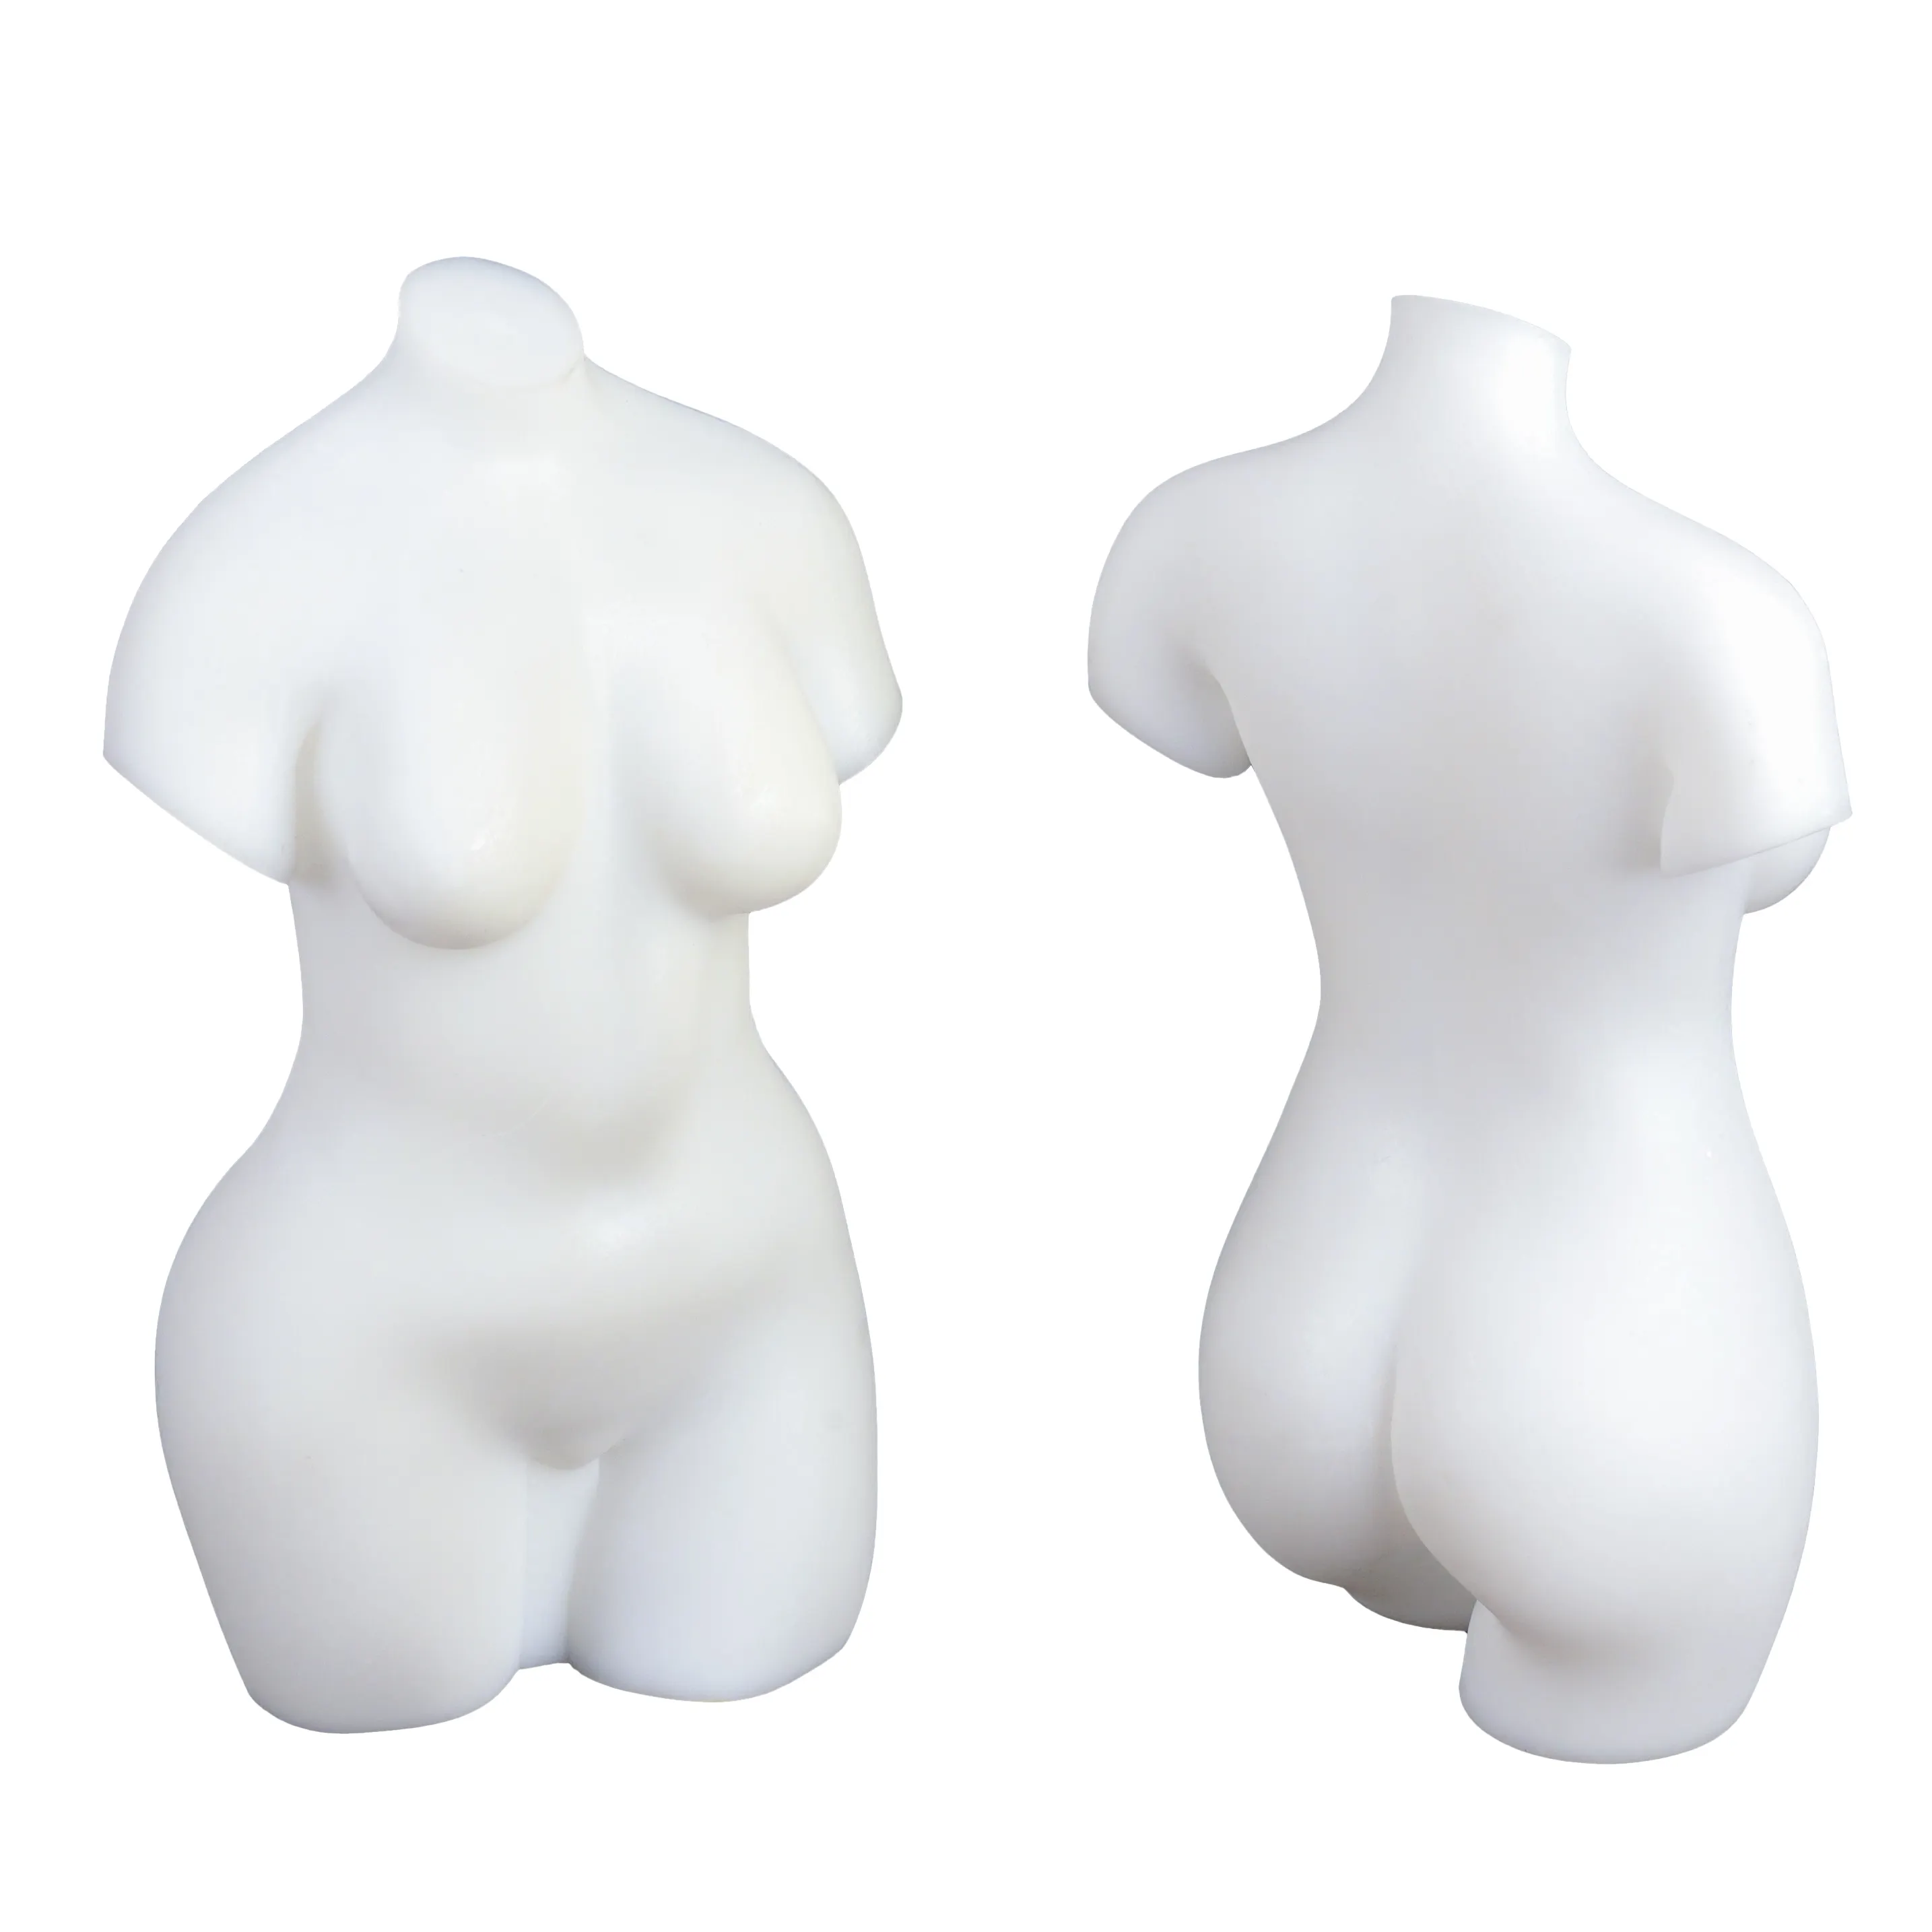 3D Body Shape Silicone Mold Goddess Female Male Model Body Stand Ornaments Ornaments Resin Mold Candle Moulds Silicone